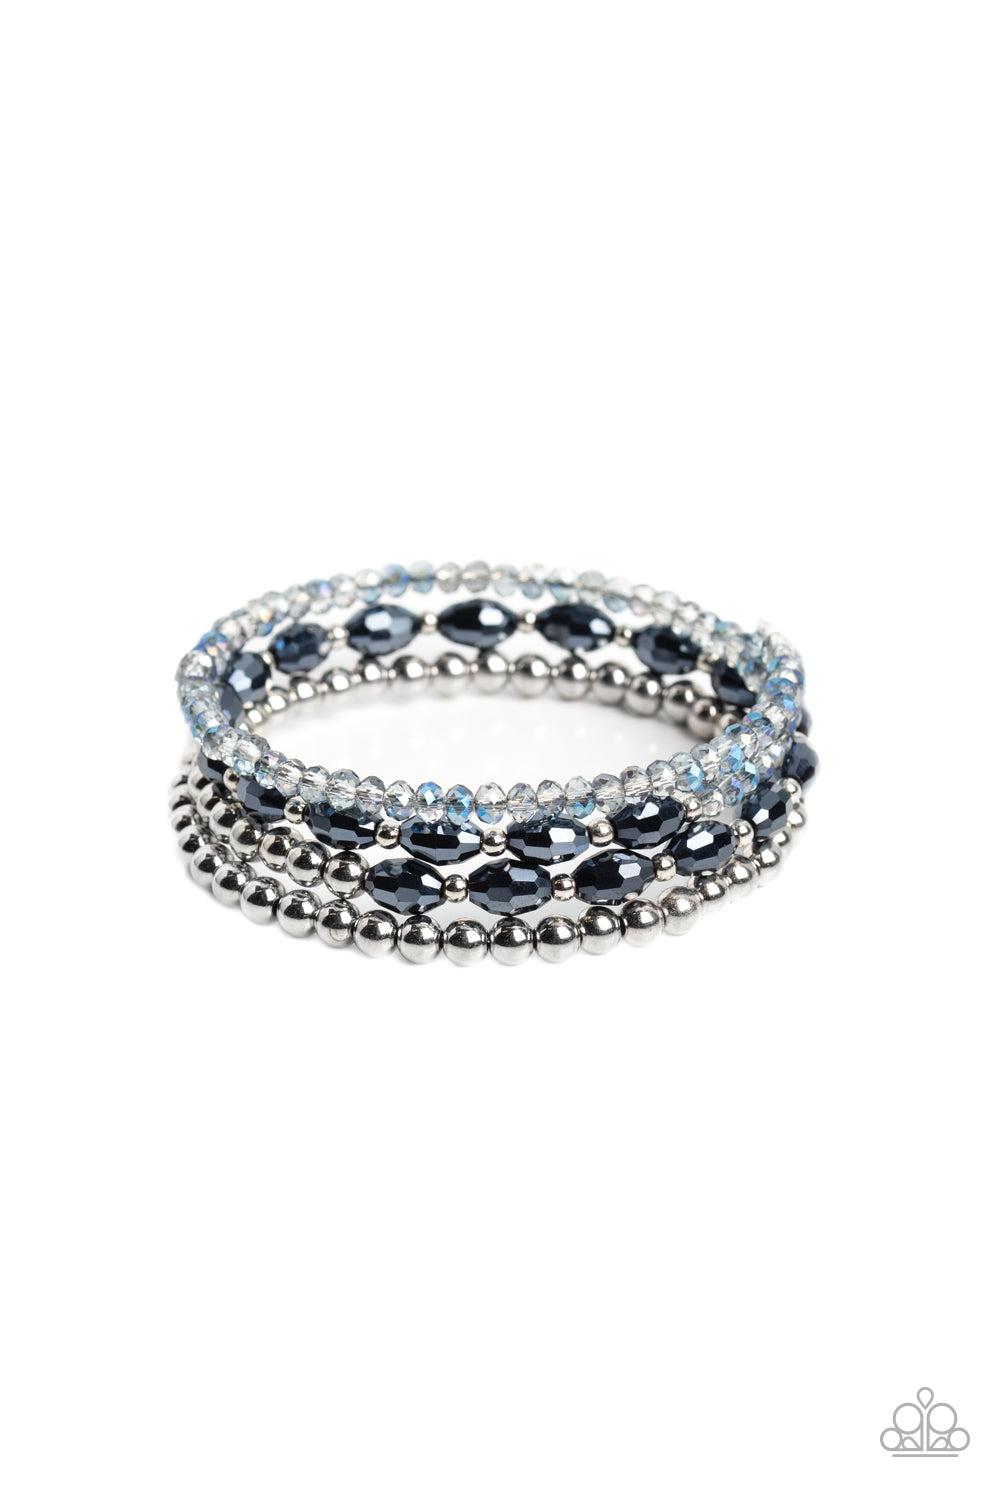 Celestial Chapter Blue Coil Bracelet - Paparazzi Accessories- lightbox - CarasShop.com - $5 Jewelry by Cara Jewels